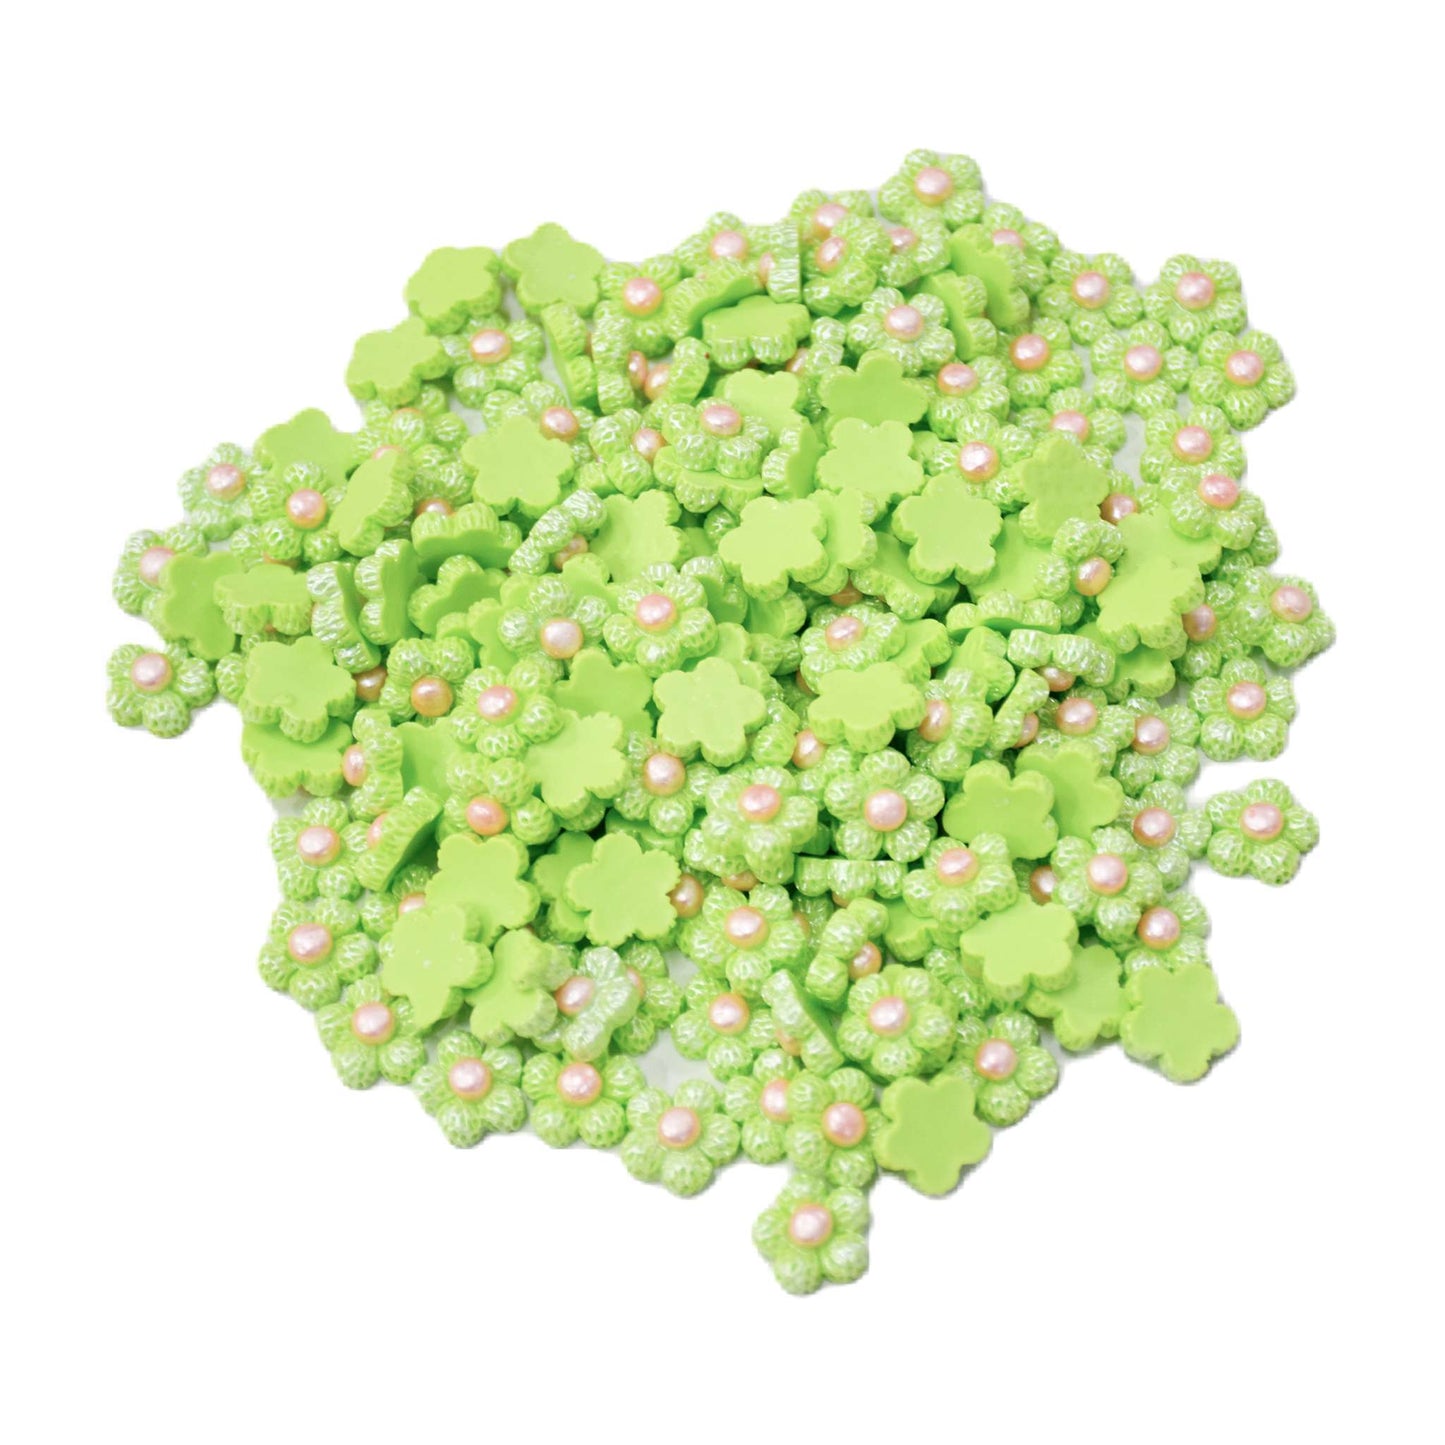 Indian Petals Flat Base Beaded Acrylic Resin Flowers Motif for Craft Packing Rakhi or Decoration - 12441, Lawn Green